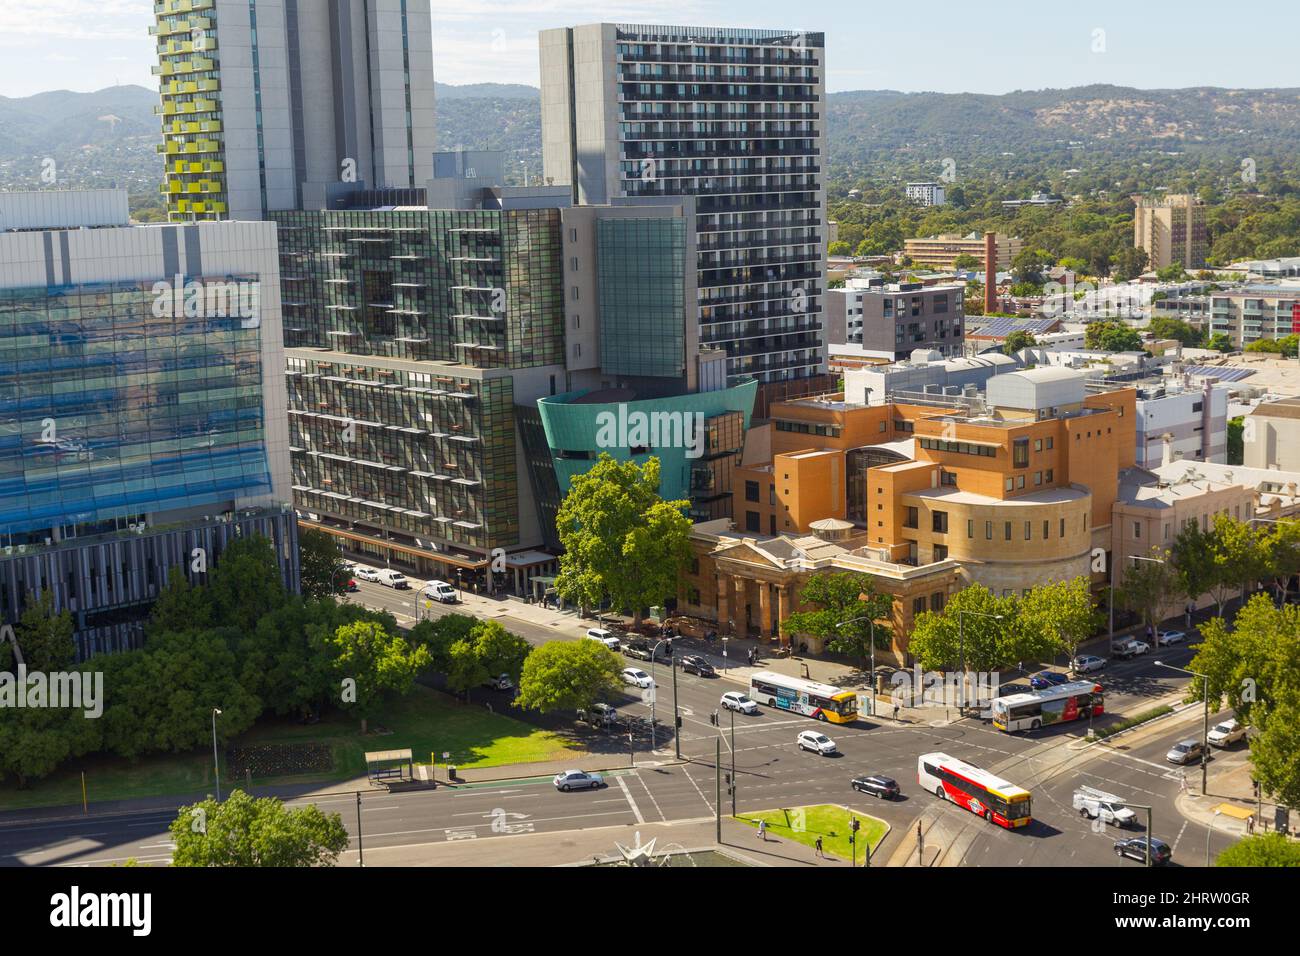 Adelaide, Australia, seen from Victoria Square, with Adelaide Magistrates Court in the foreground and the Mount Lofty Ranges in the background. Stock Photo